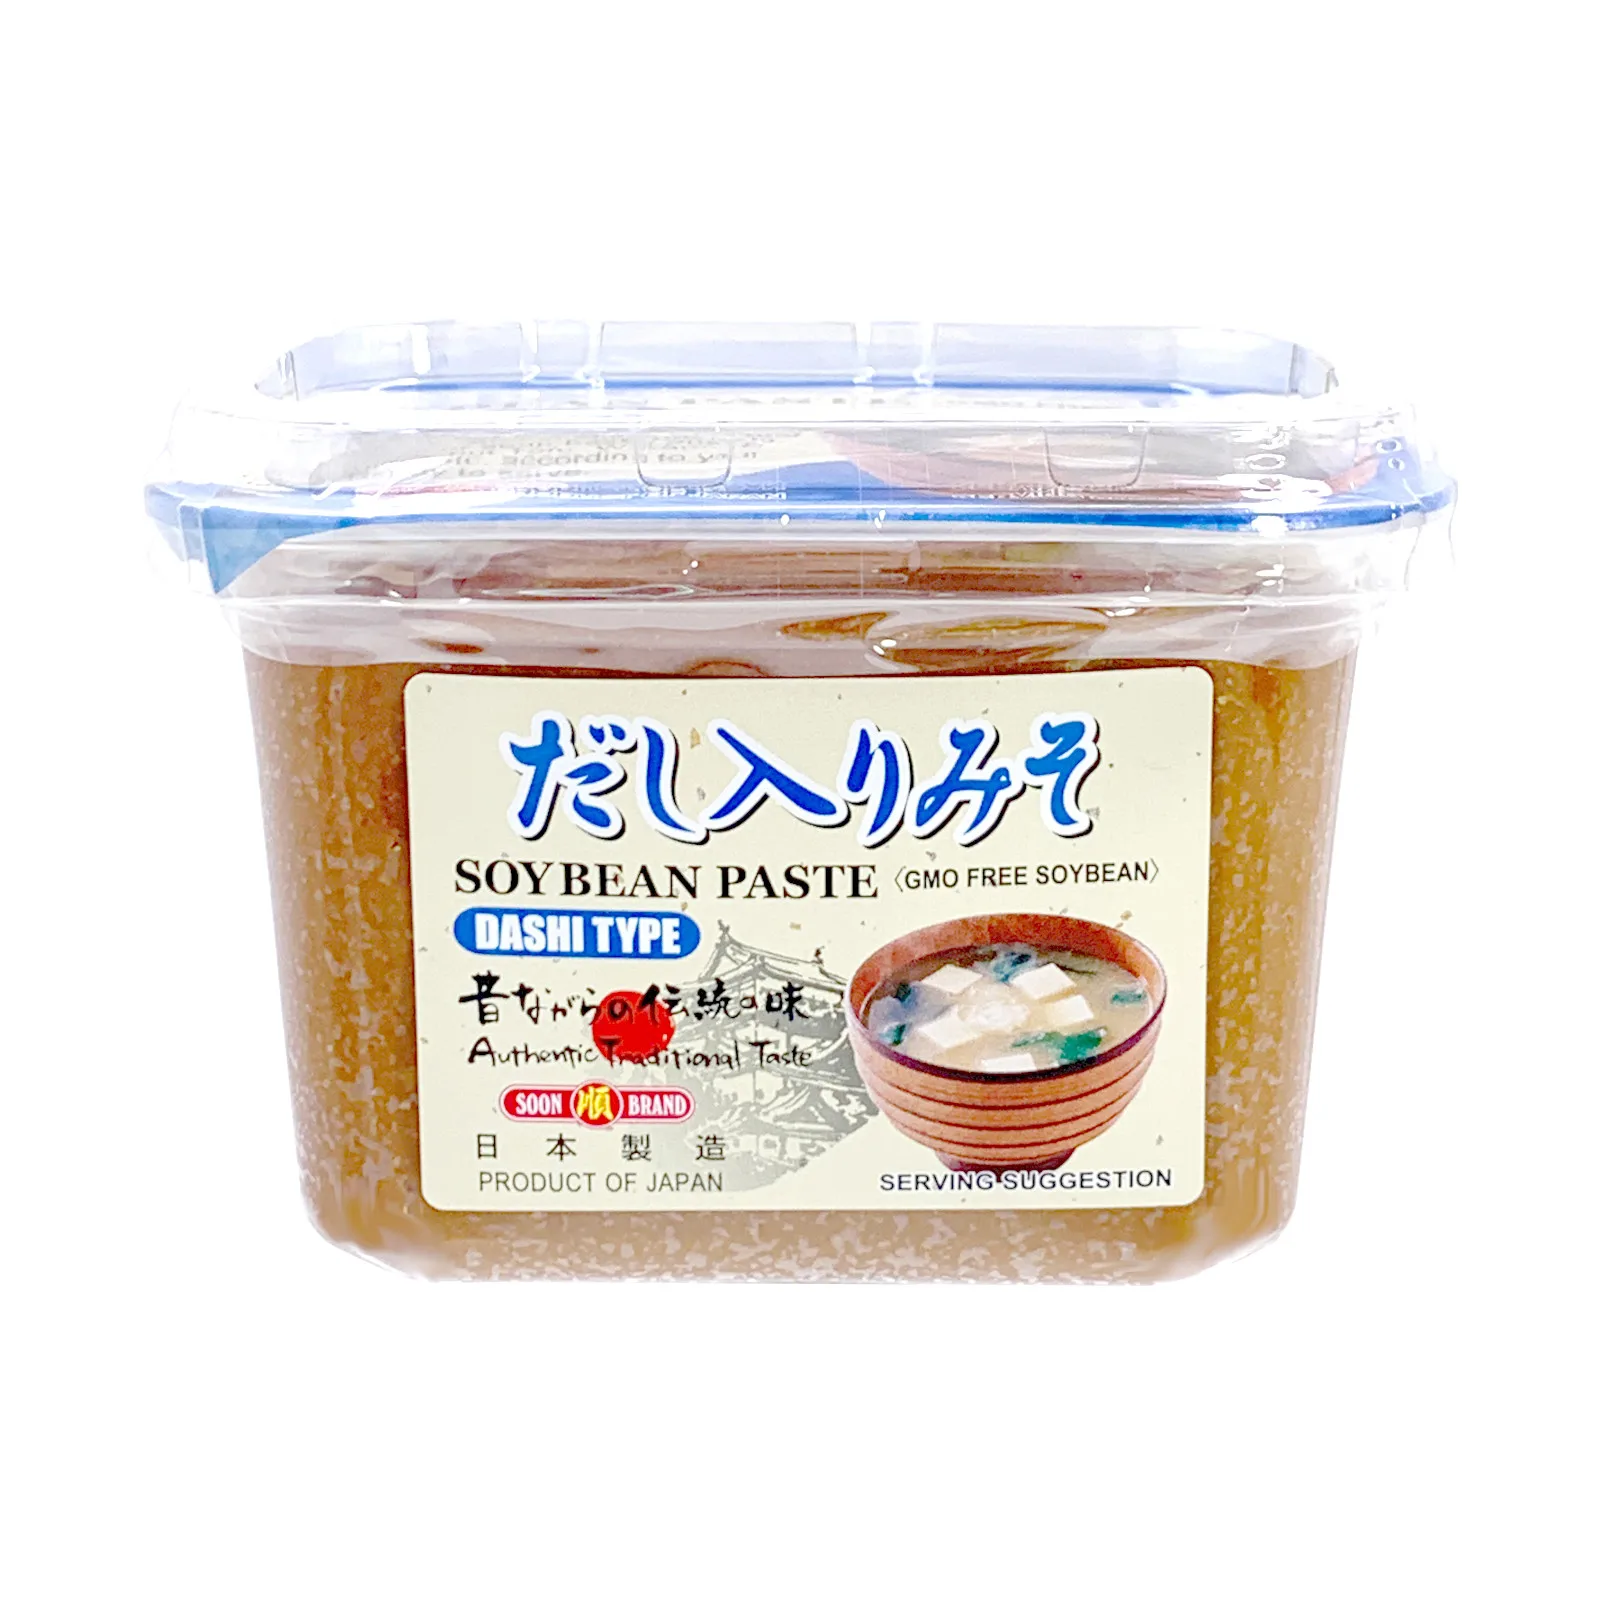 GMO Free Soybean Rice Miso Soup Paste Natural Color Ambient Traditional Seasoning Authentic Taste Dashi Iri Miso made in Japan (10000003949326)